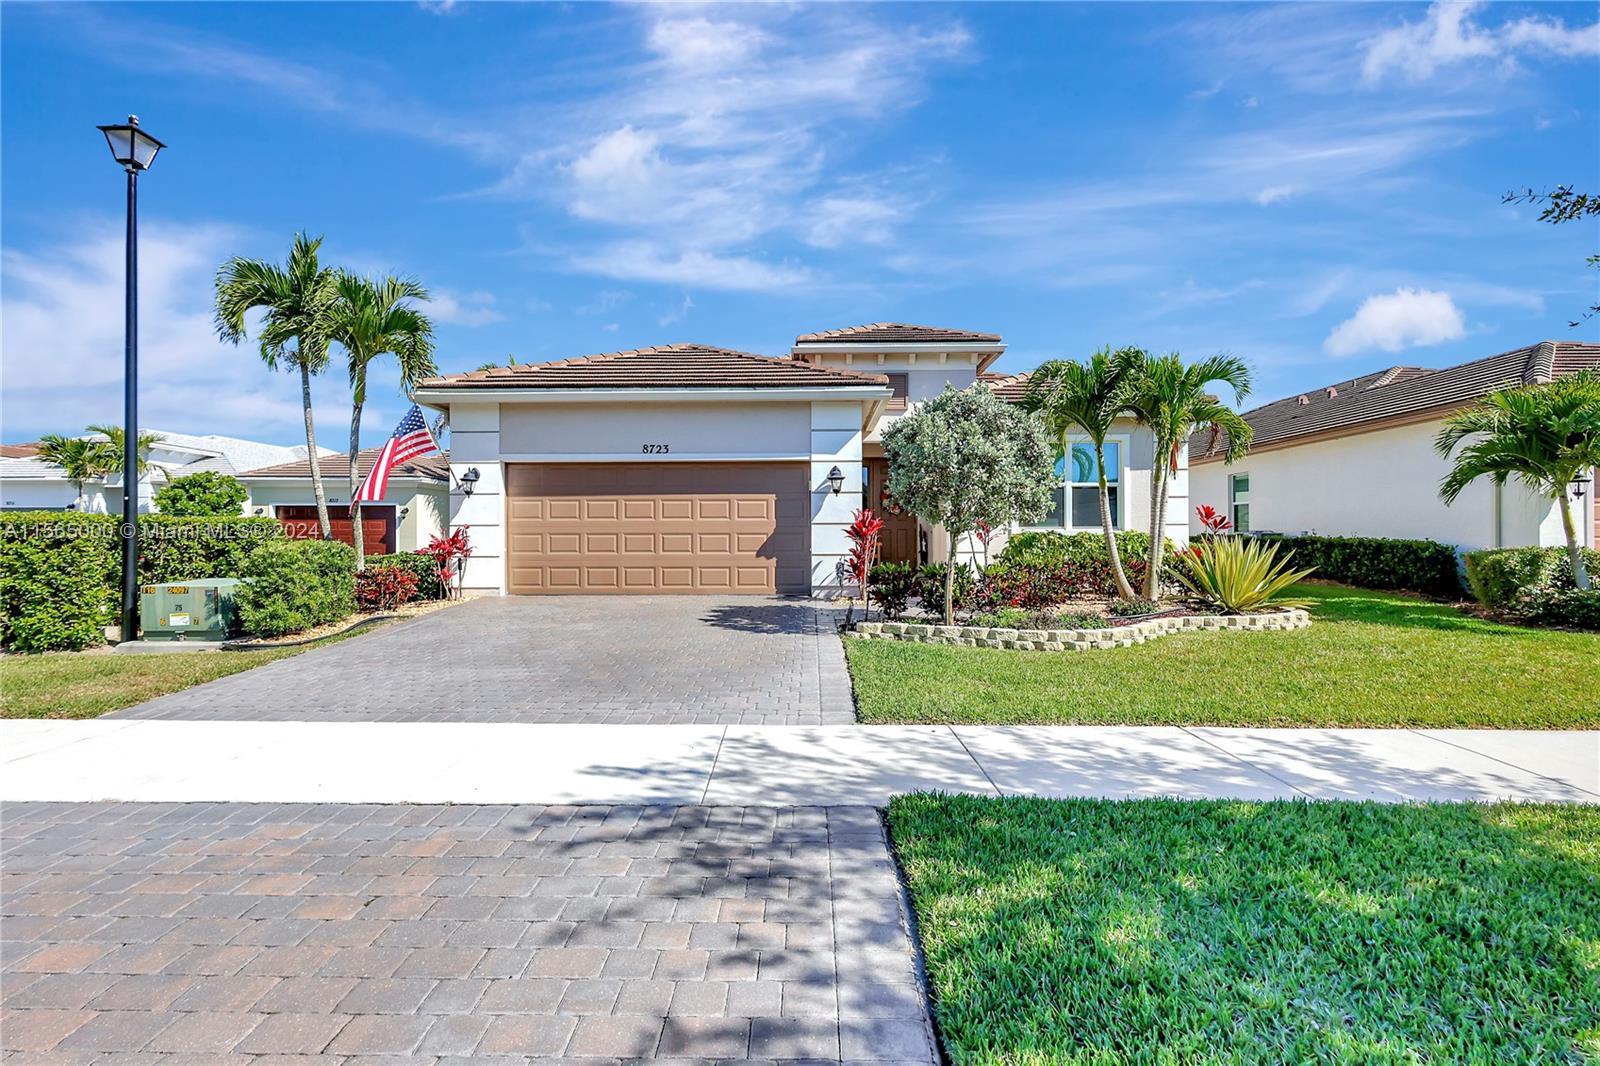 Photo of 8723 SW Vico Wy in Port St Lucie, FL